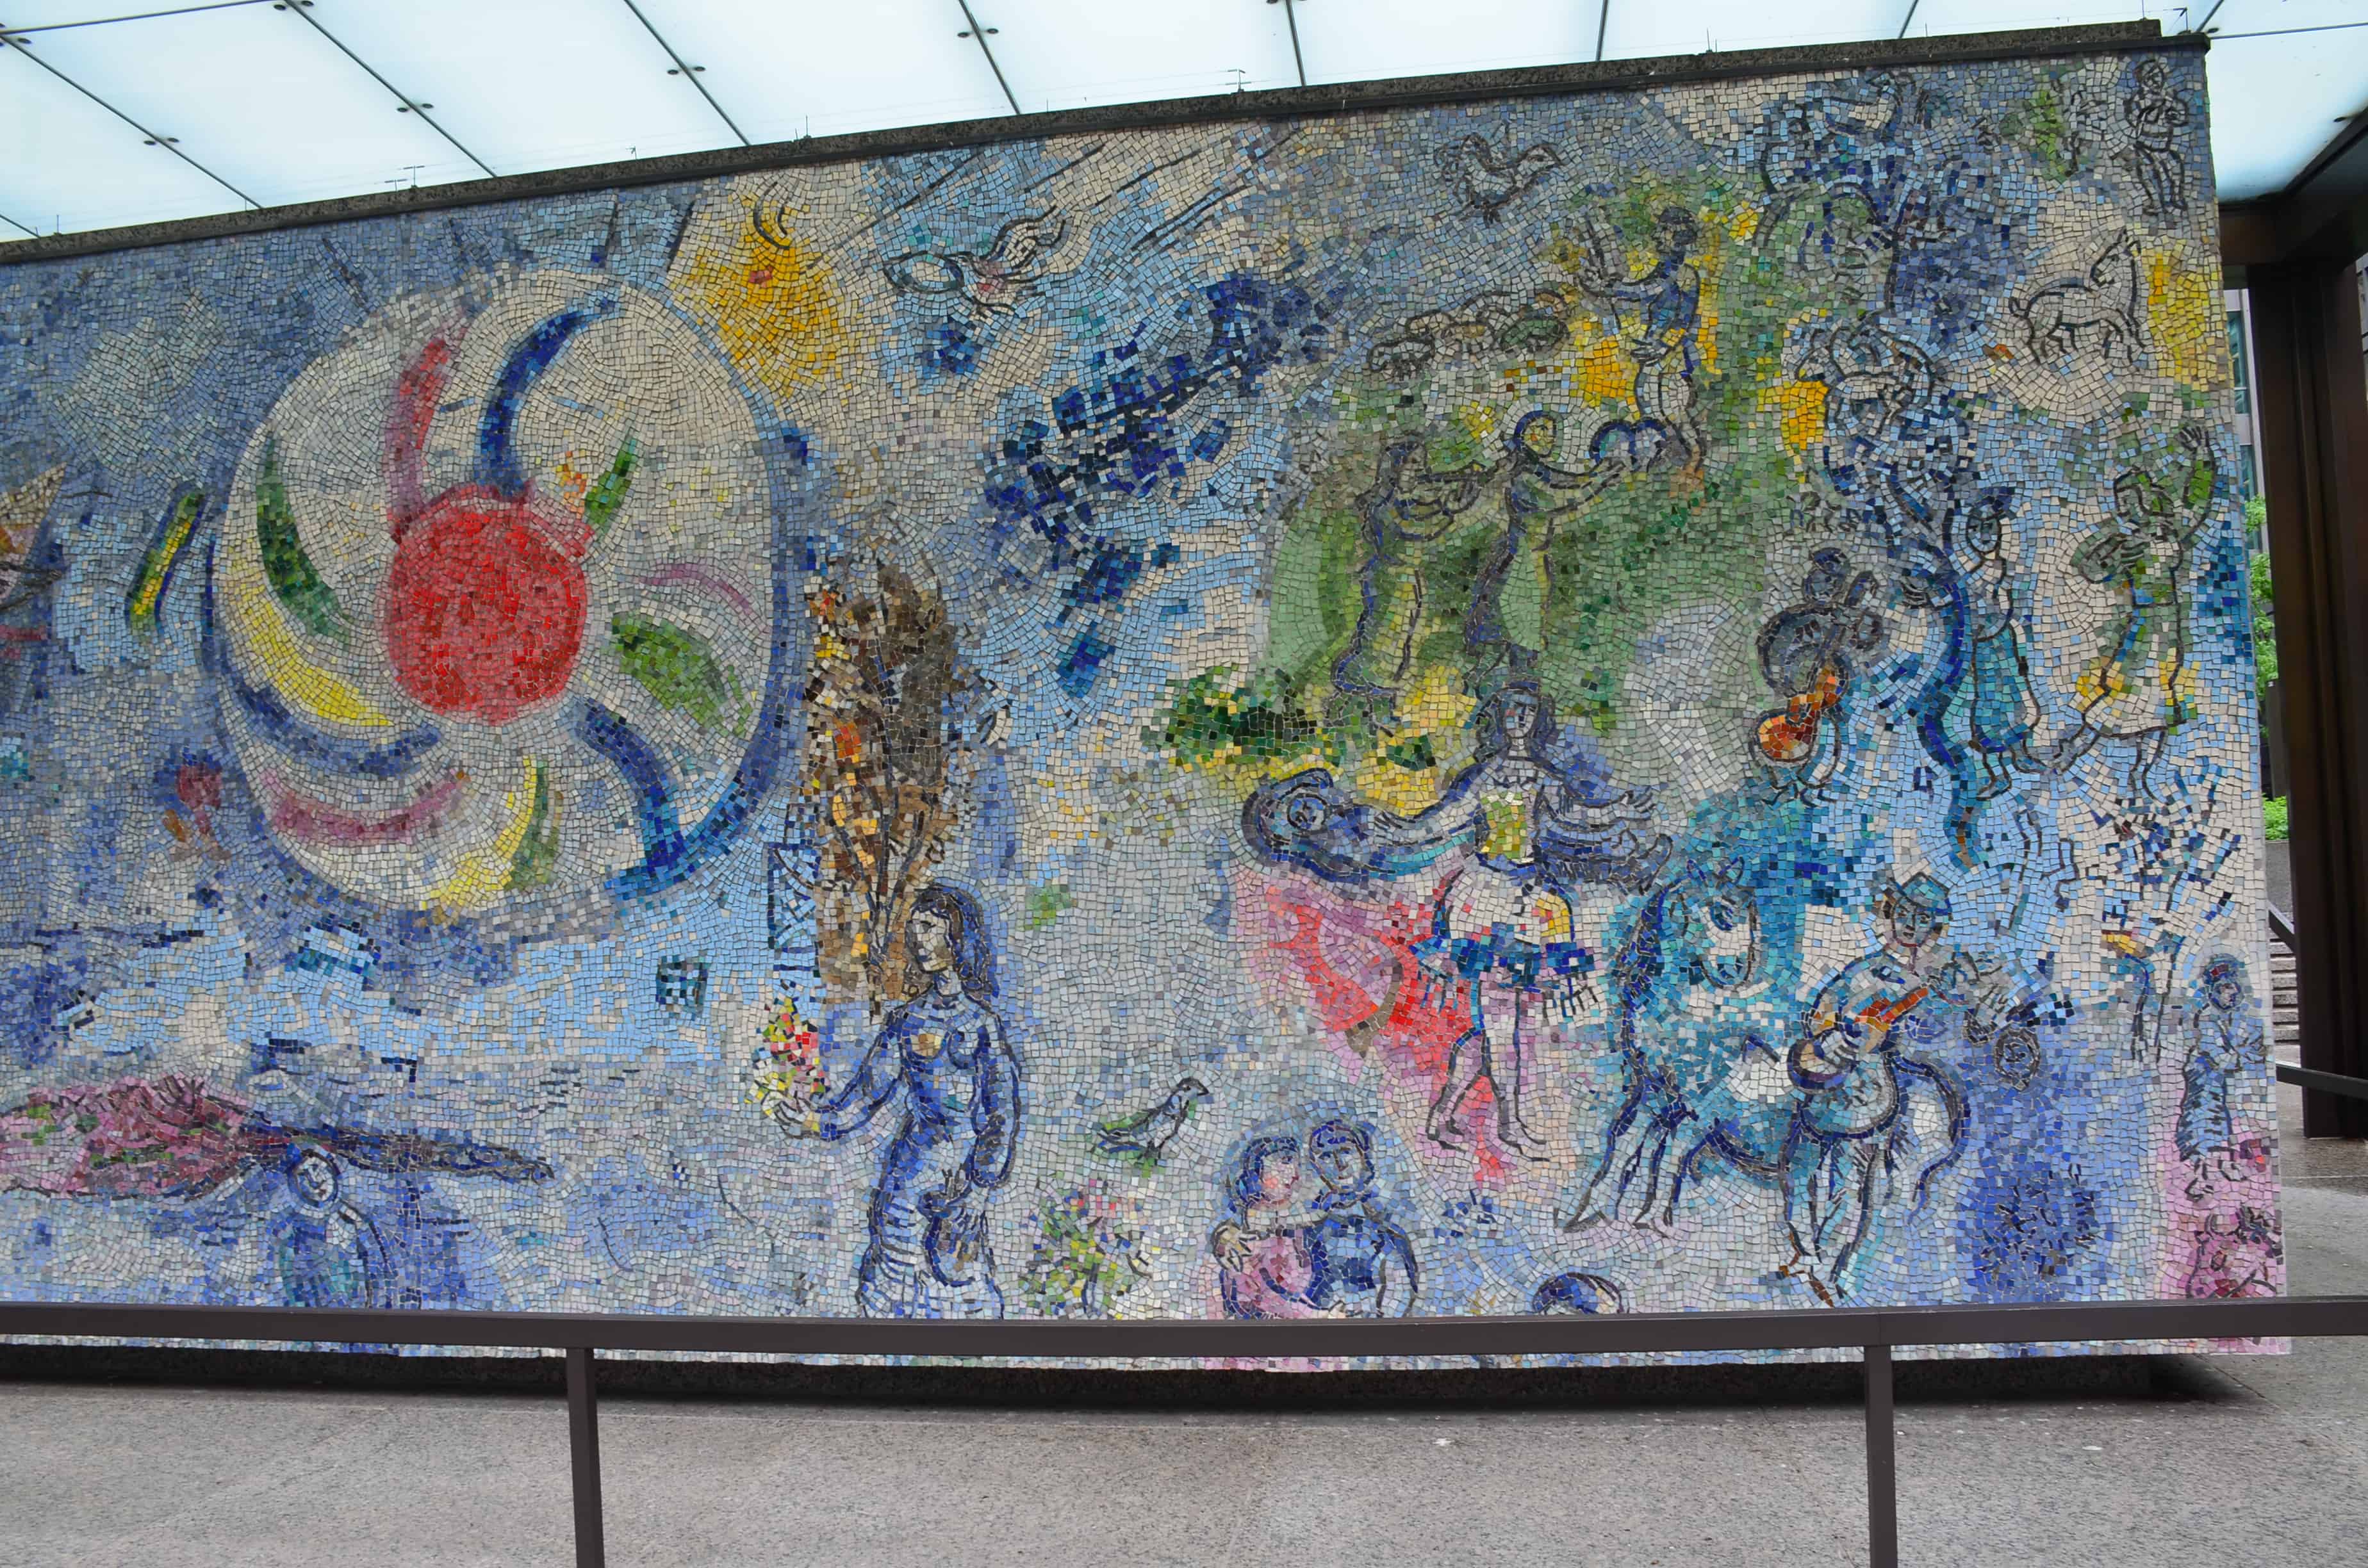 Four Seasons by Marc Chagall in Chicago, Illinois